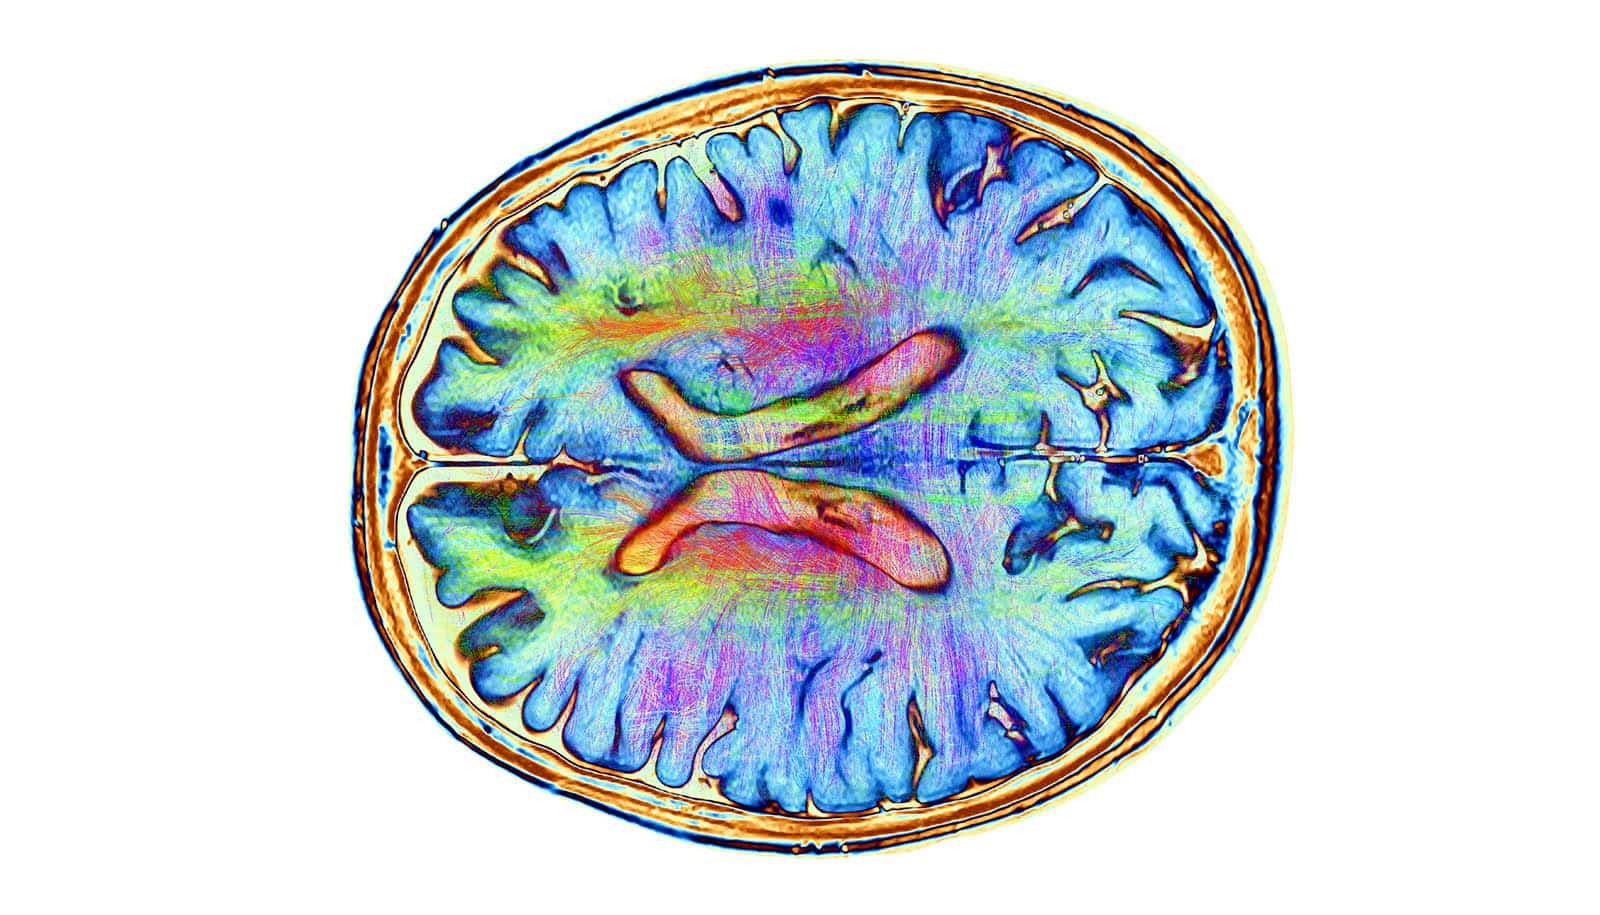 colorful brain scan